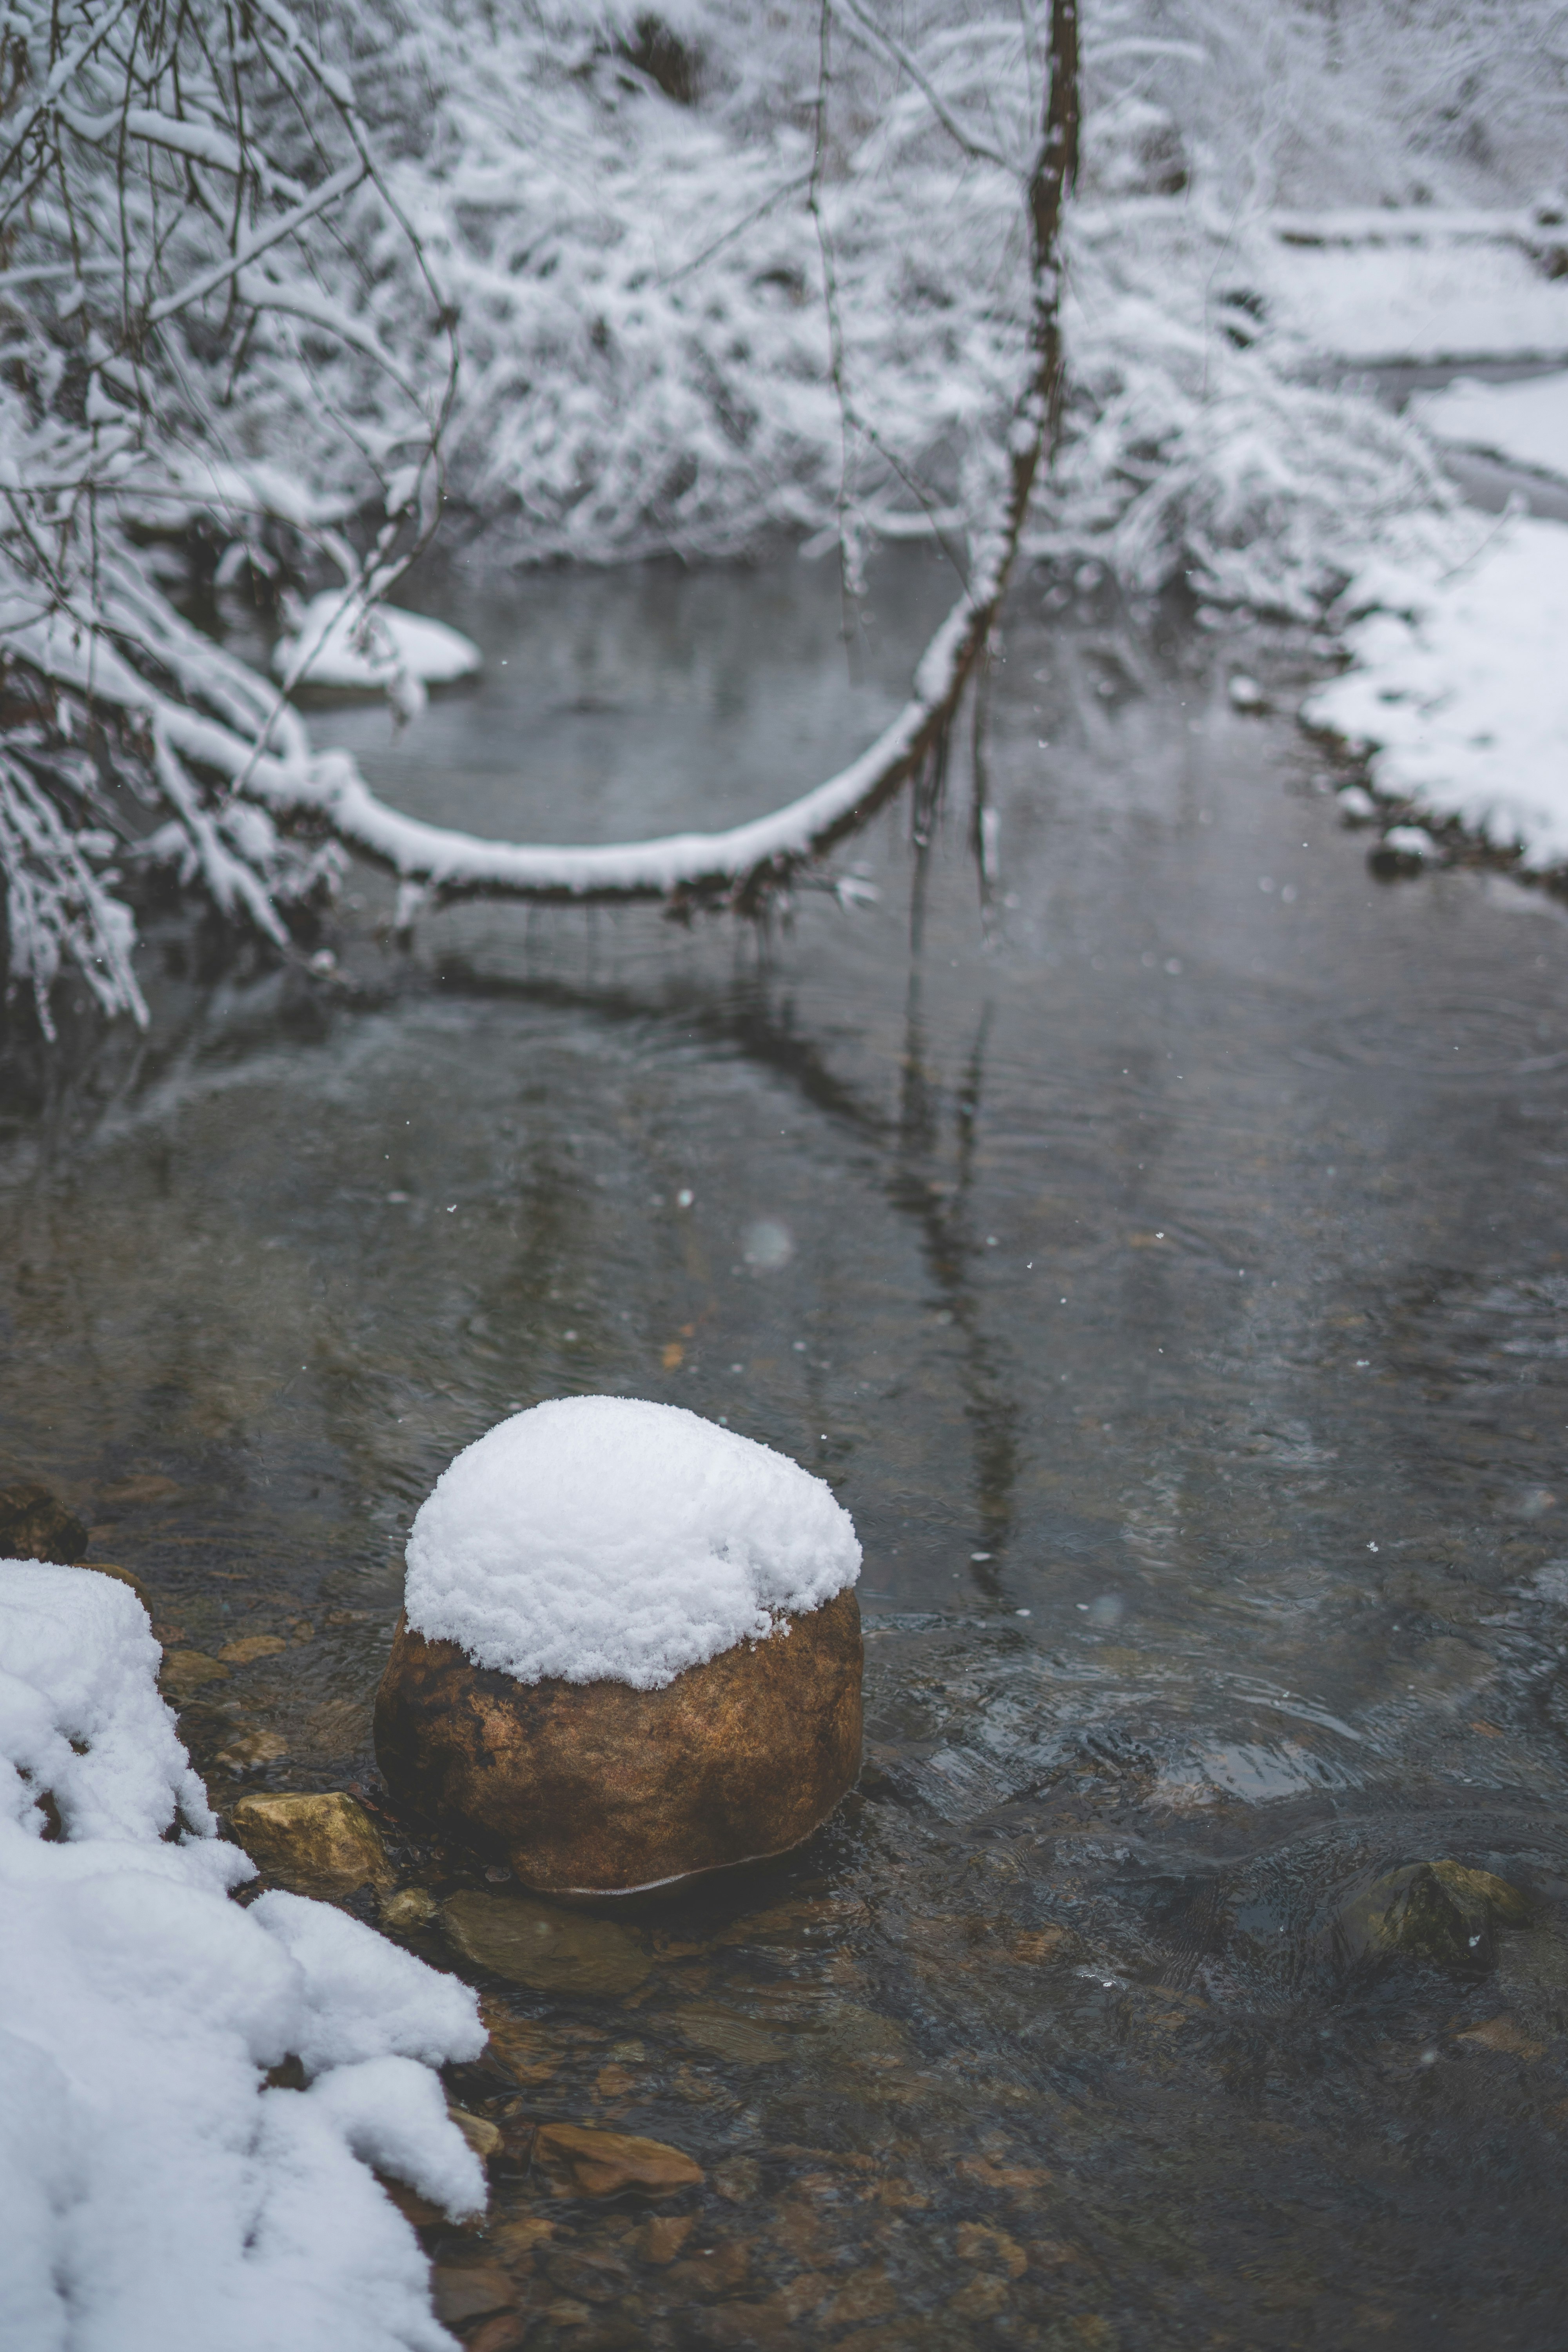 Snow on a rock in a stream